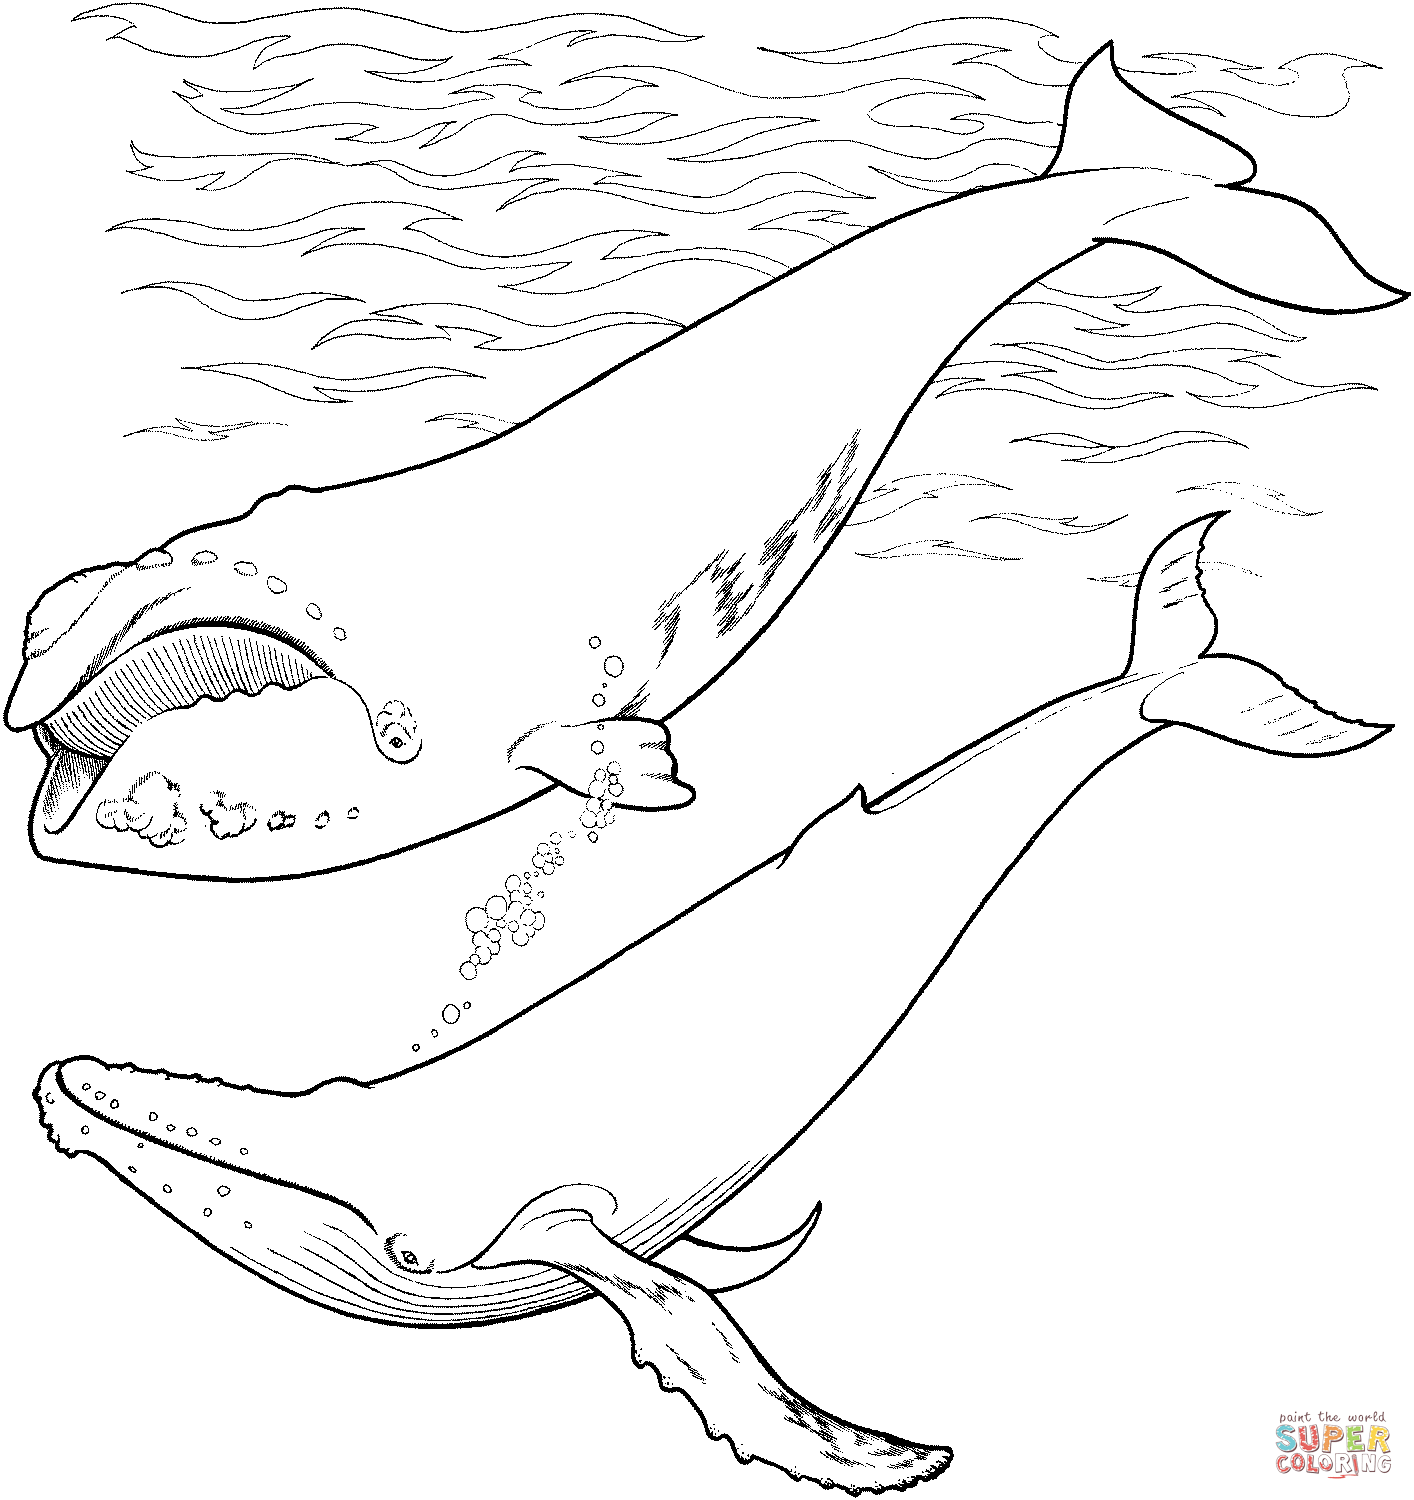 Humpback Whale coloring #5, Download drawings